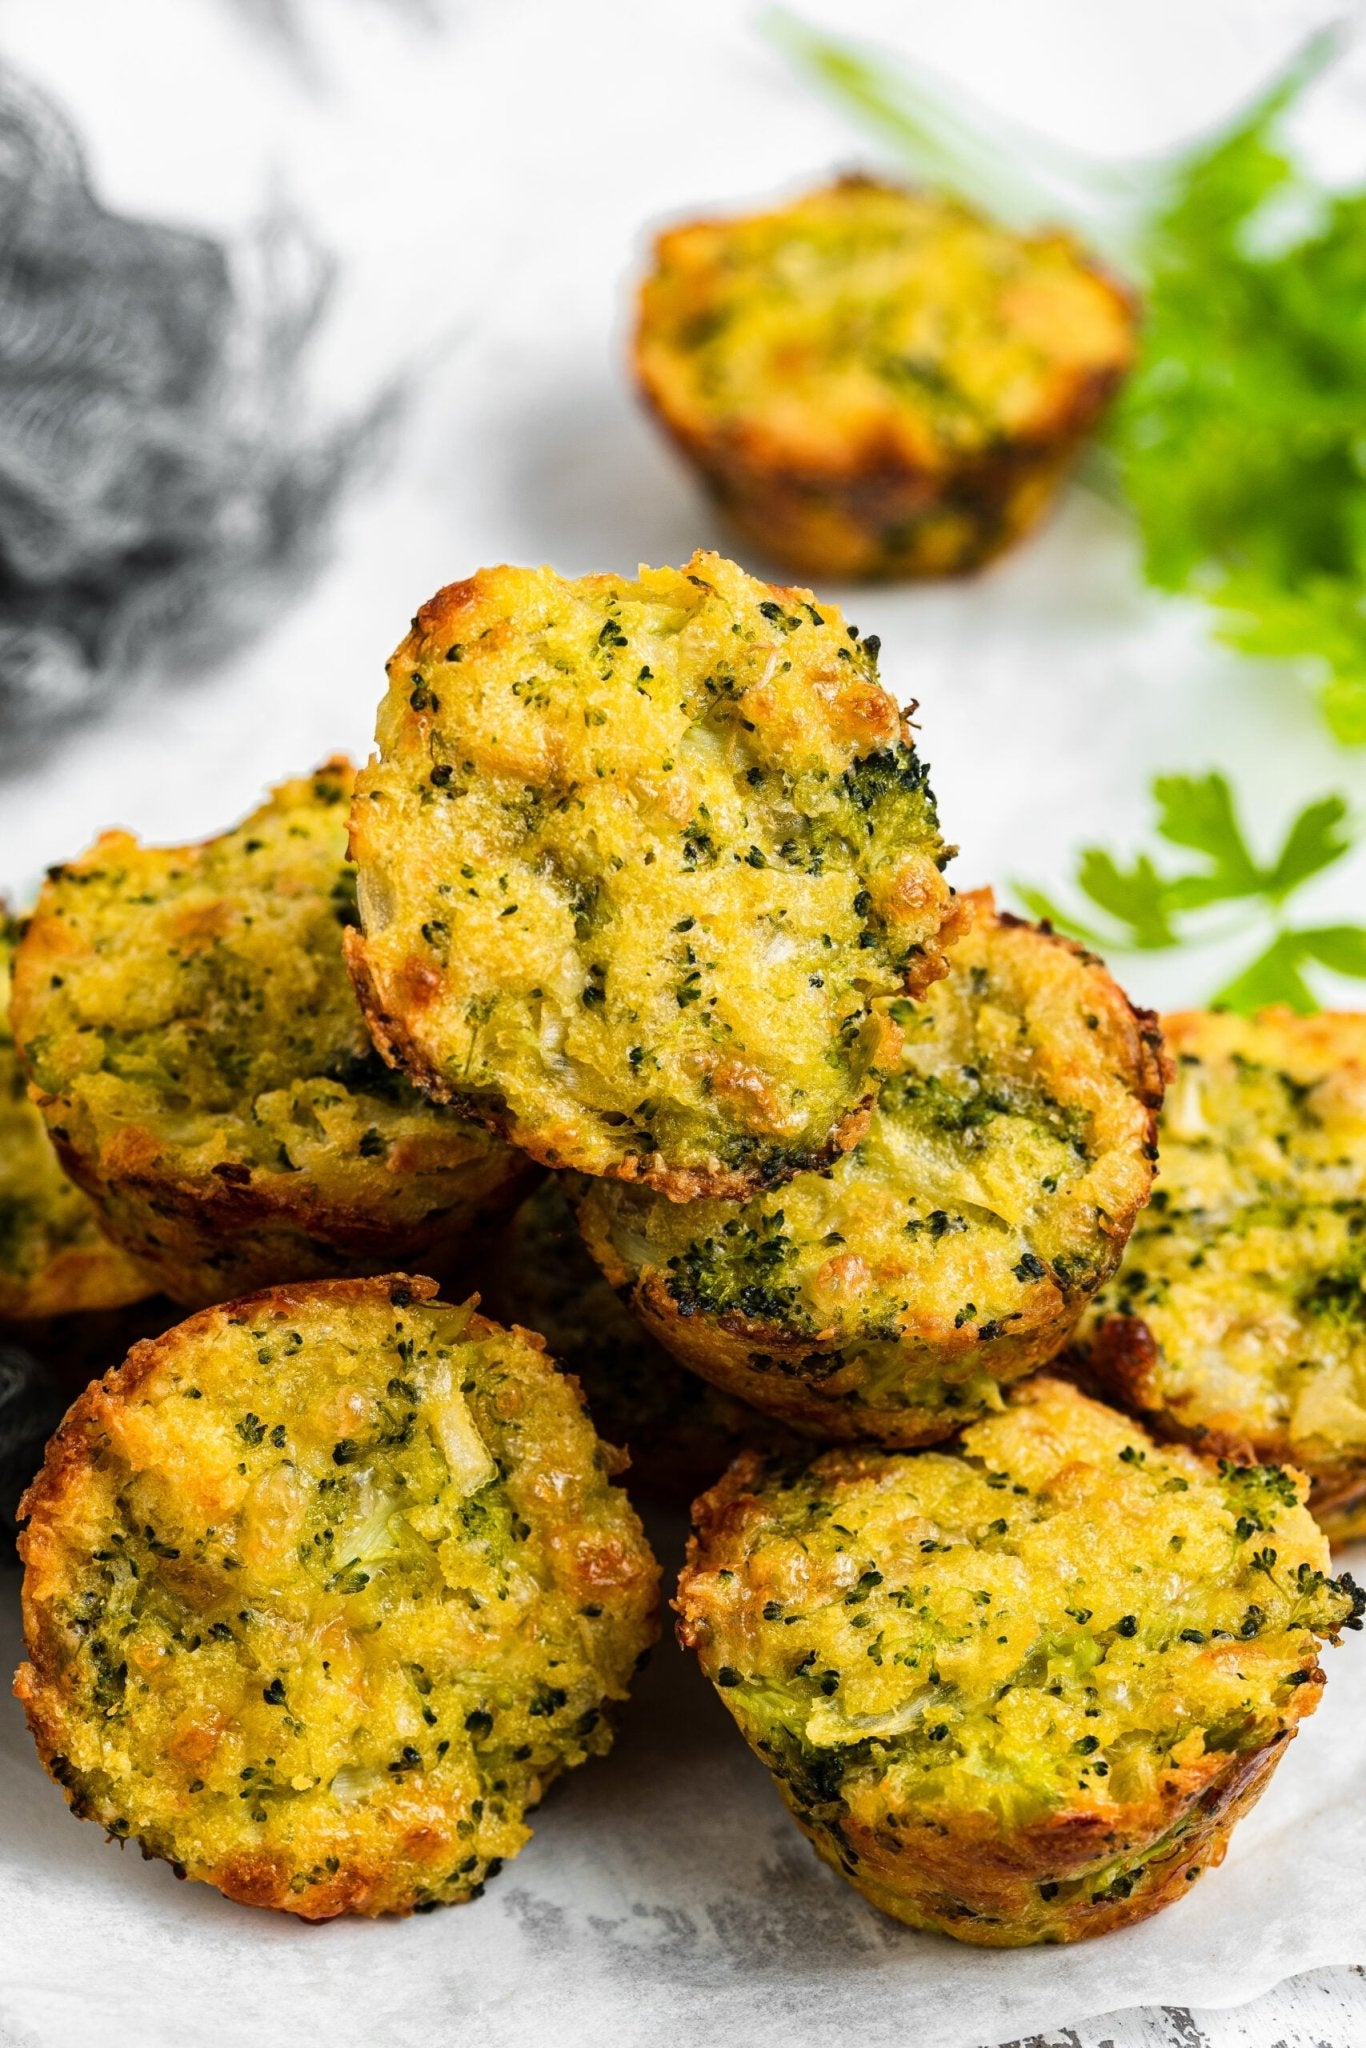 Meatless Monday Recipe: Cheesy Broccoli Bites - Sprout Organic